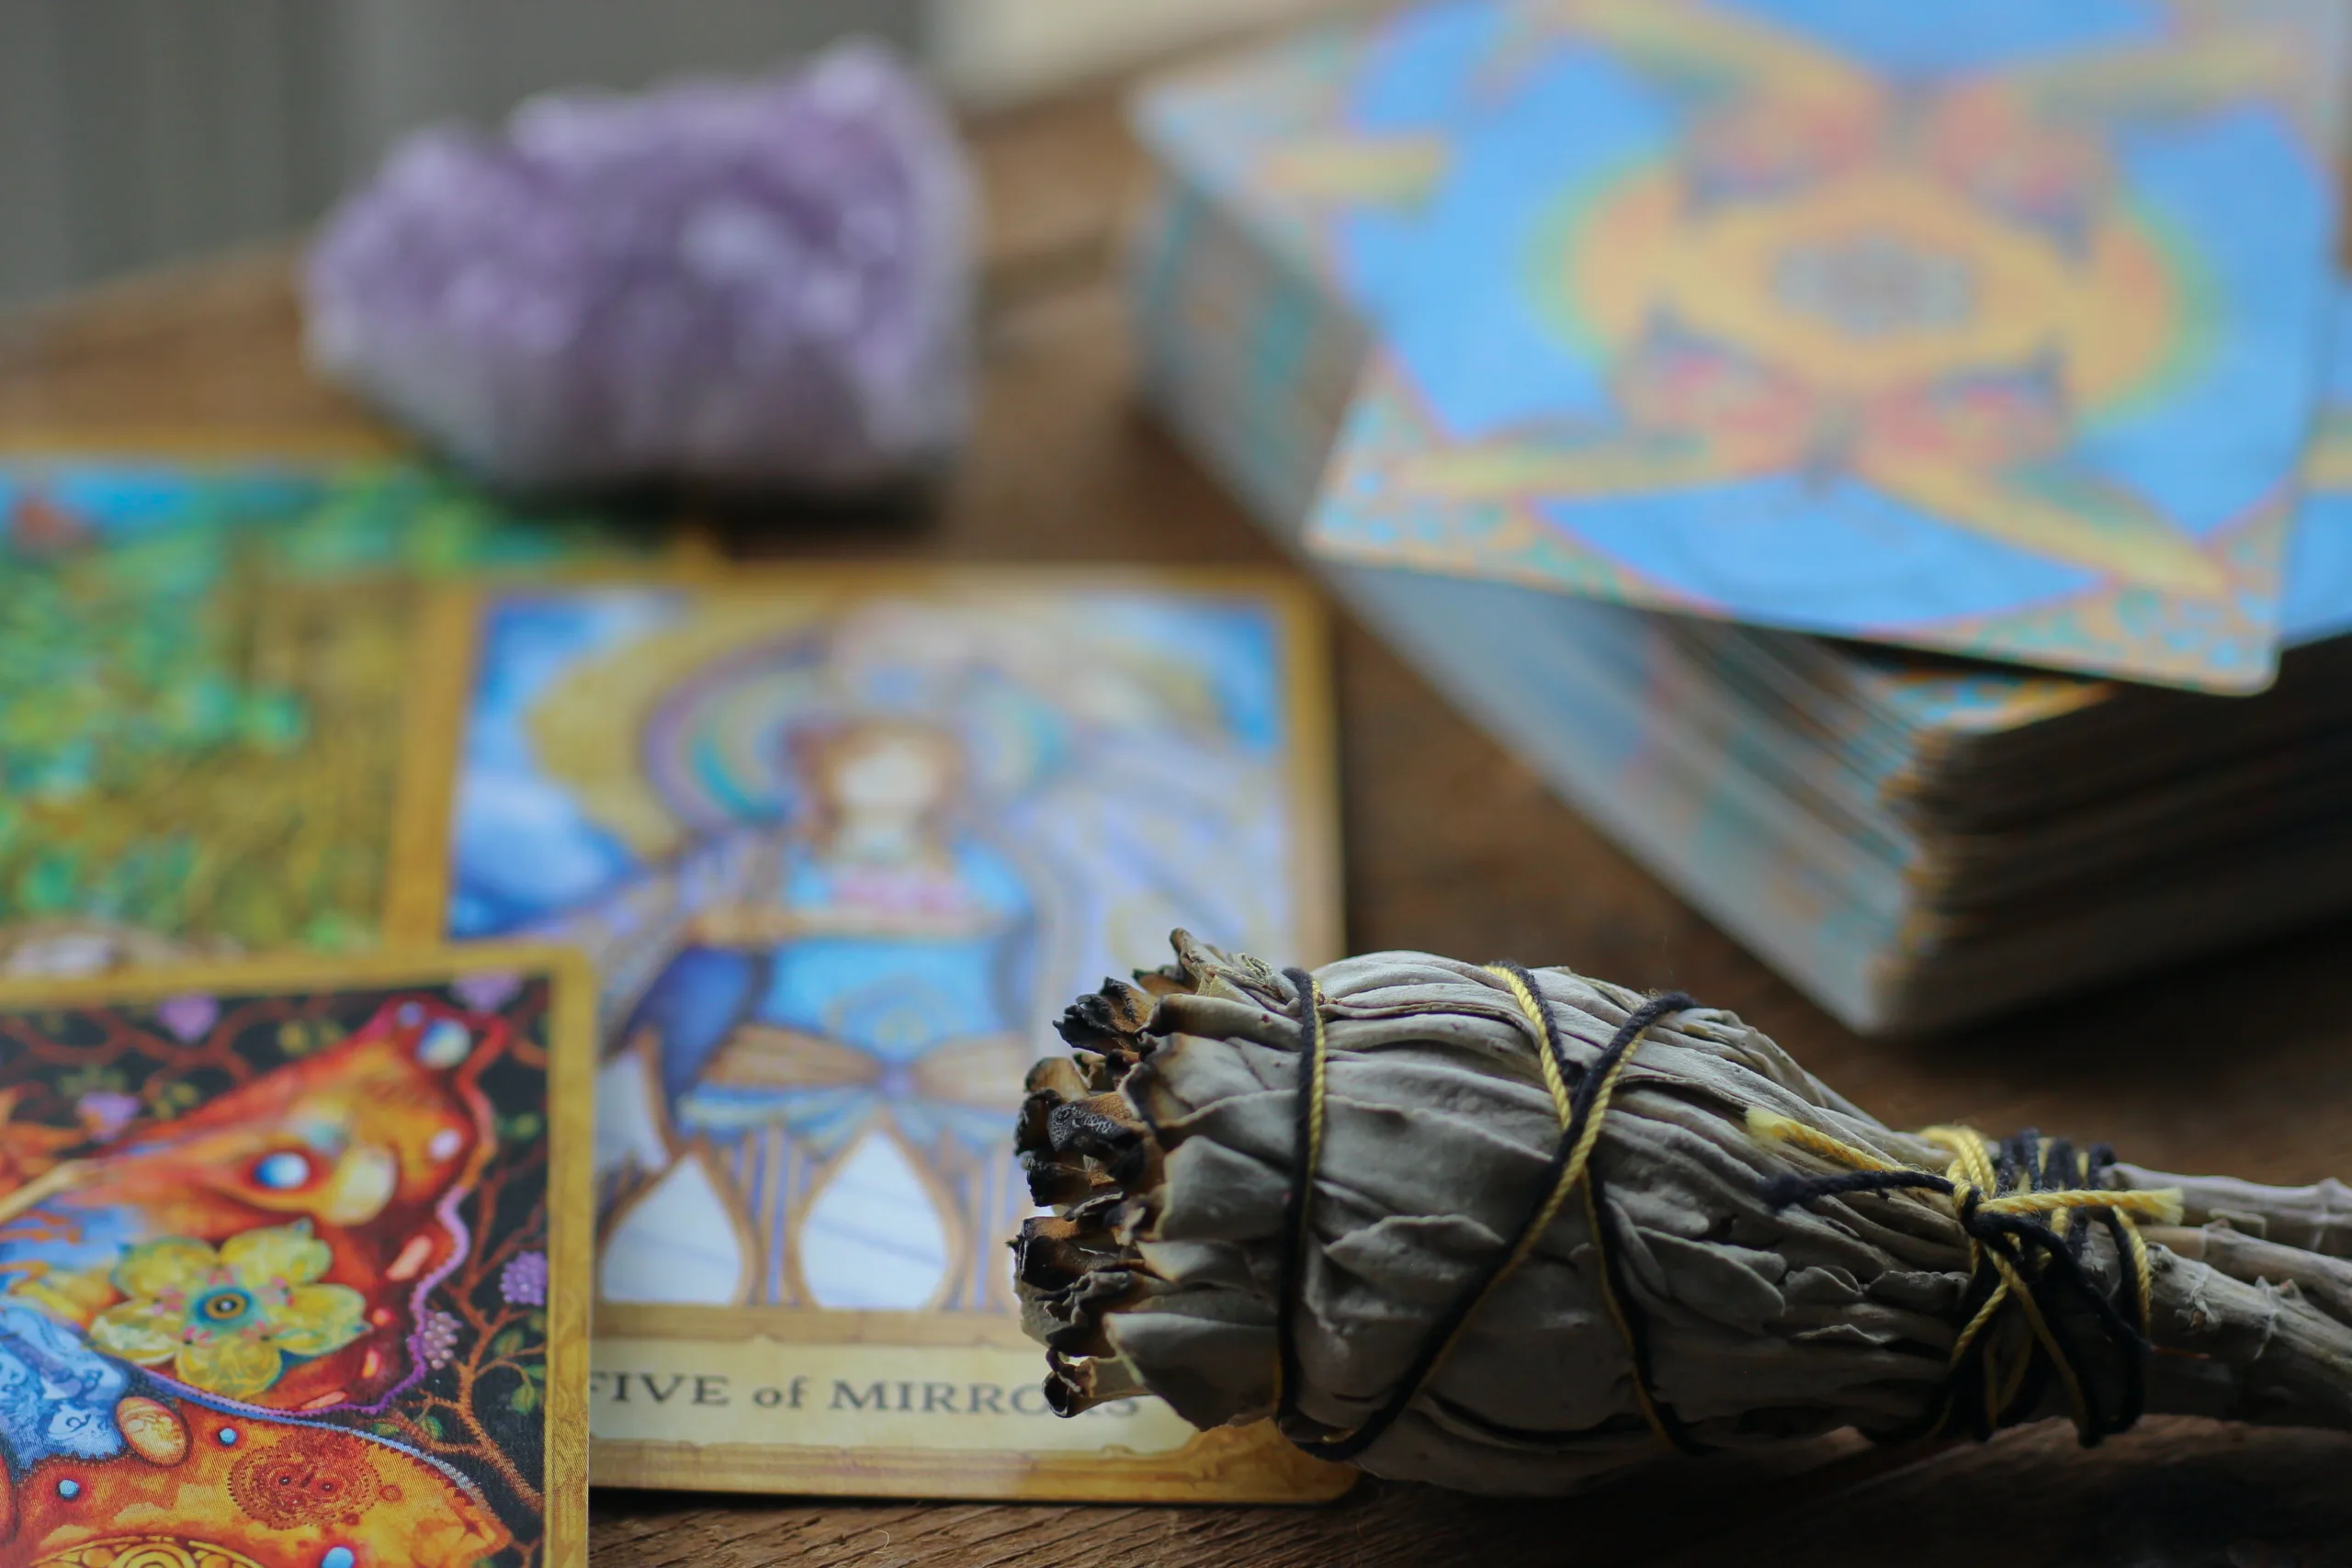 How to properly get rid of tarot cards?